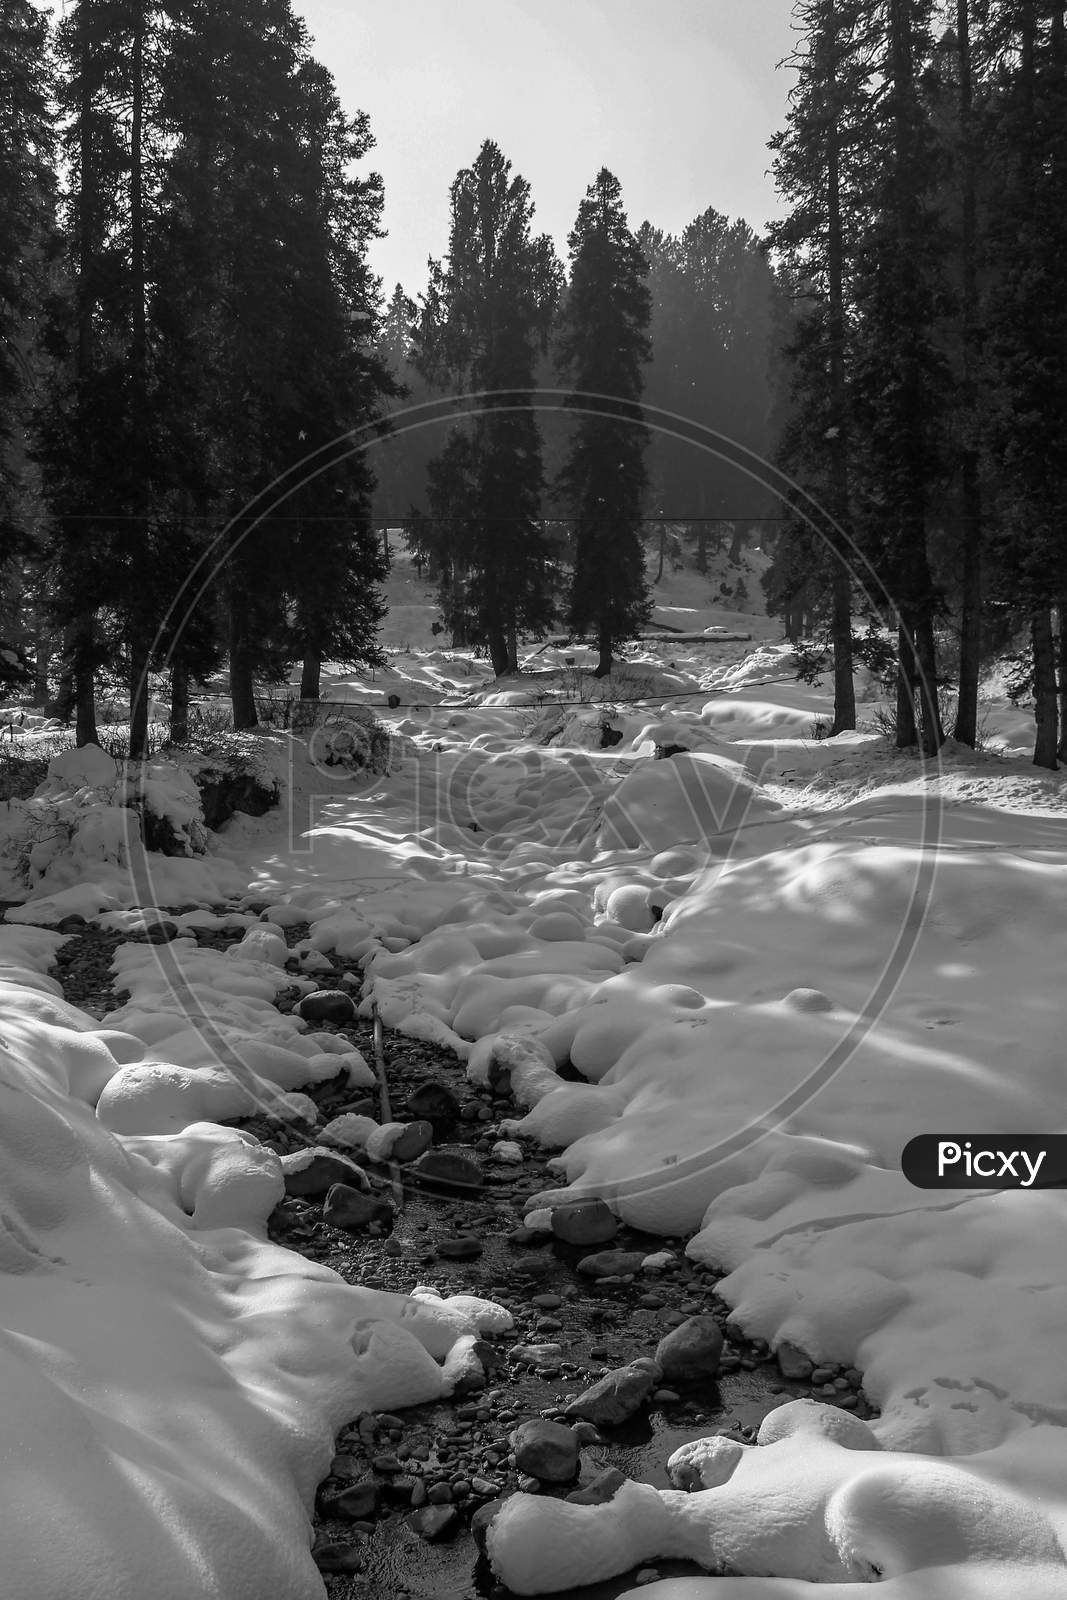 A Downstream Brook Out Of The Woods And Land Covered In Snow.